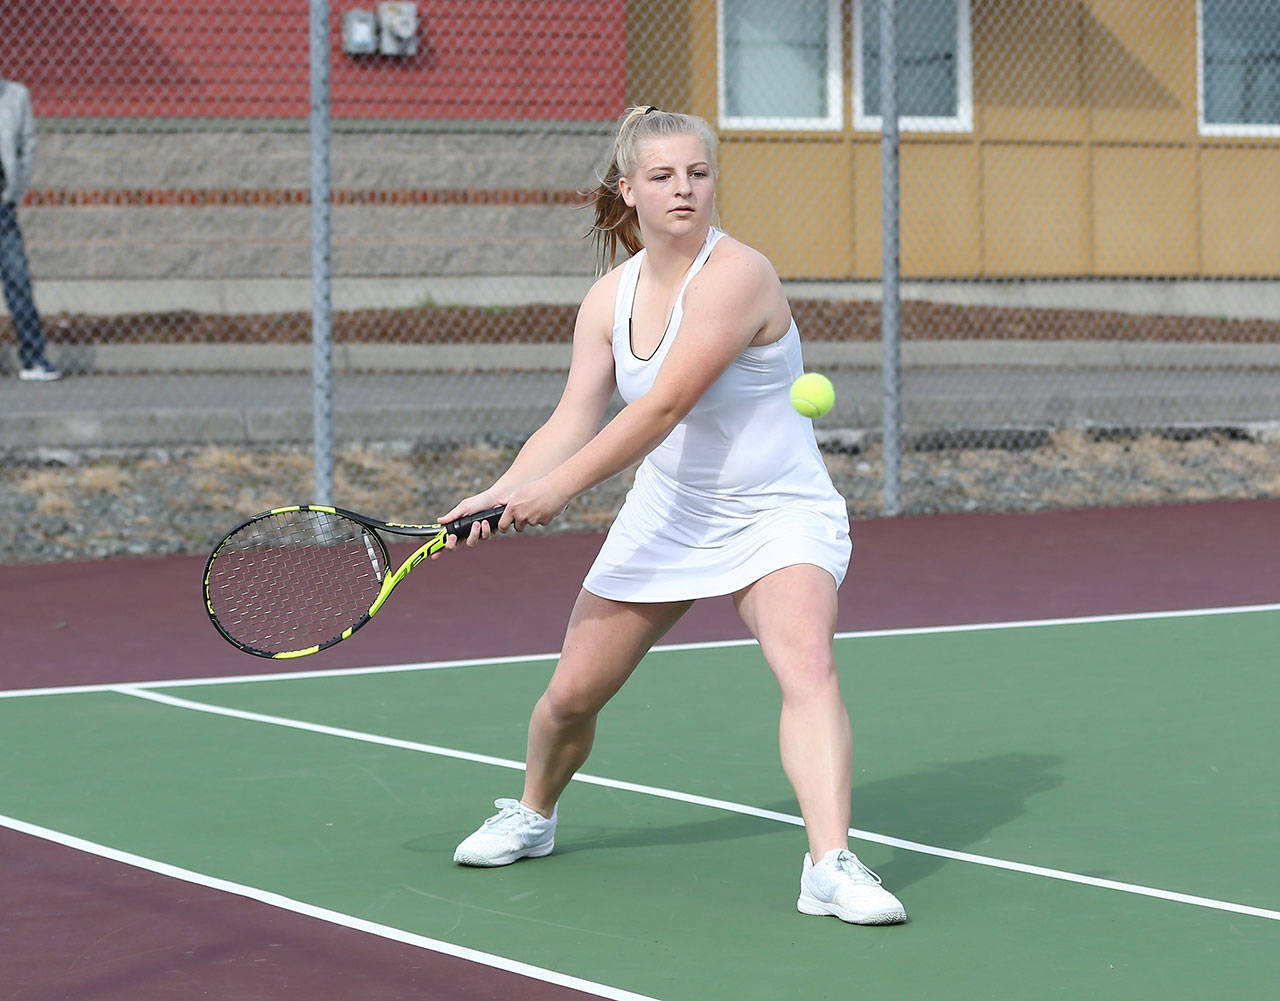 Avalon Renninger, shown here, and doubles partner Tia Wurzrainer earned first-team, all-league honors in tennis as juniors.(Photo by John Fisken)